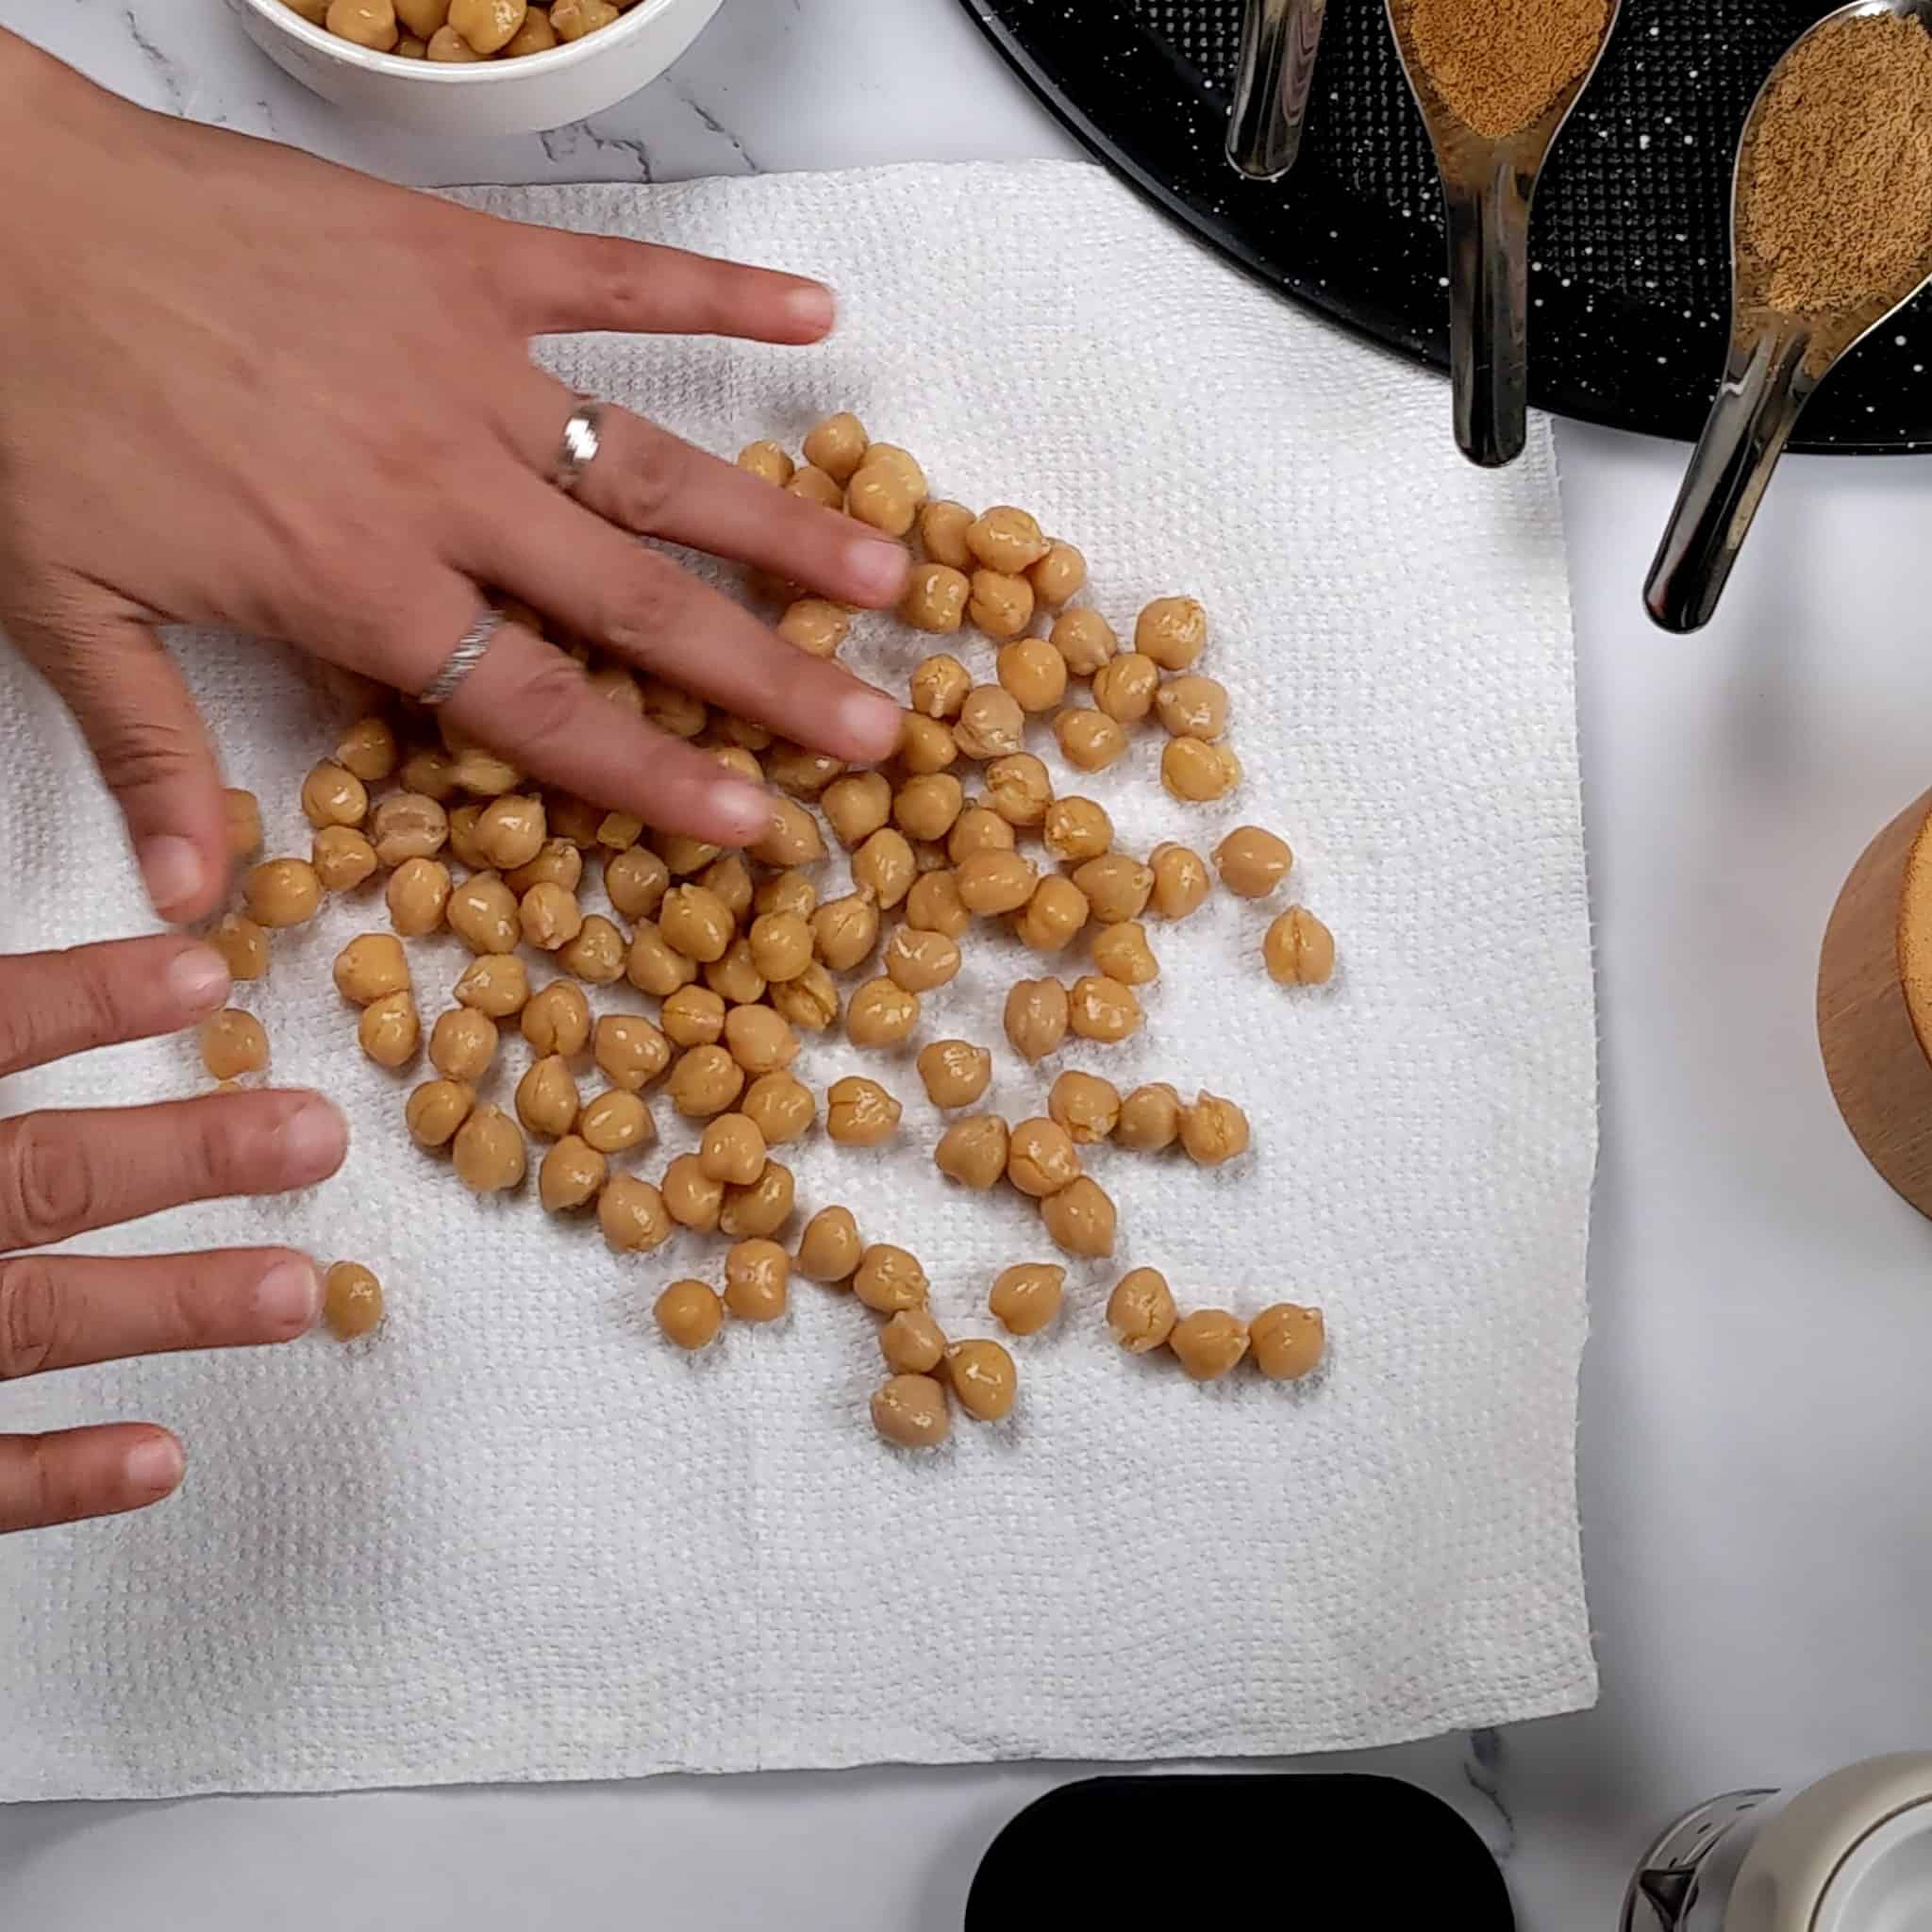 hands spreading out chickpeas on a paper towel.